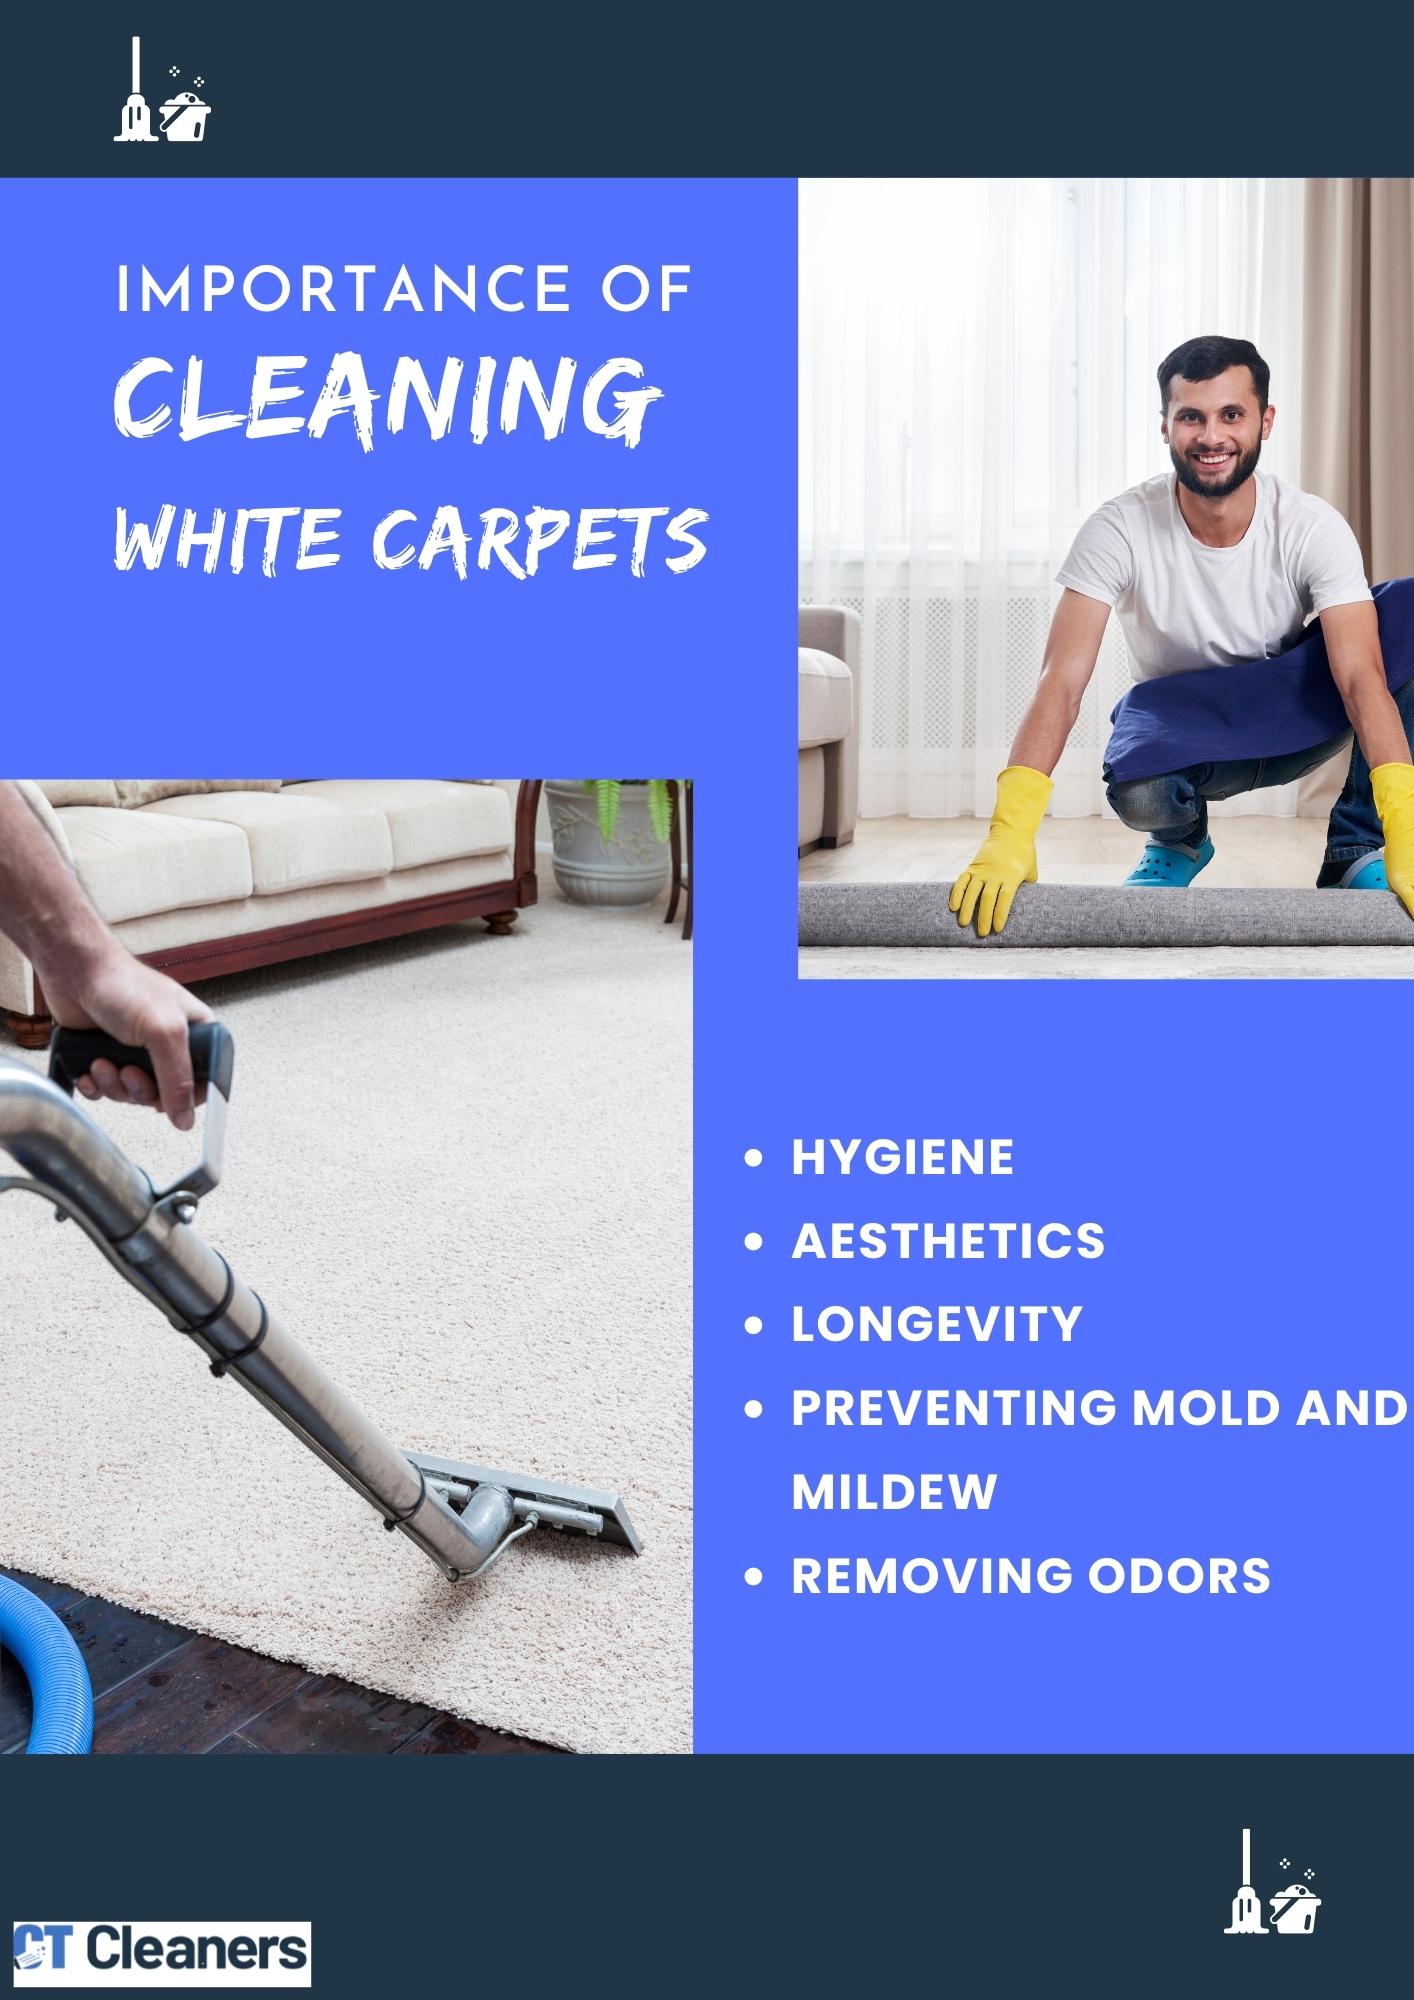 Importance of Cleaning White Carpets